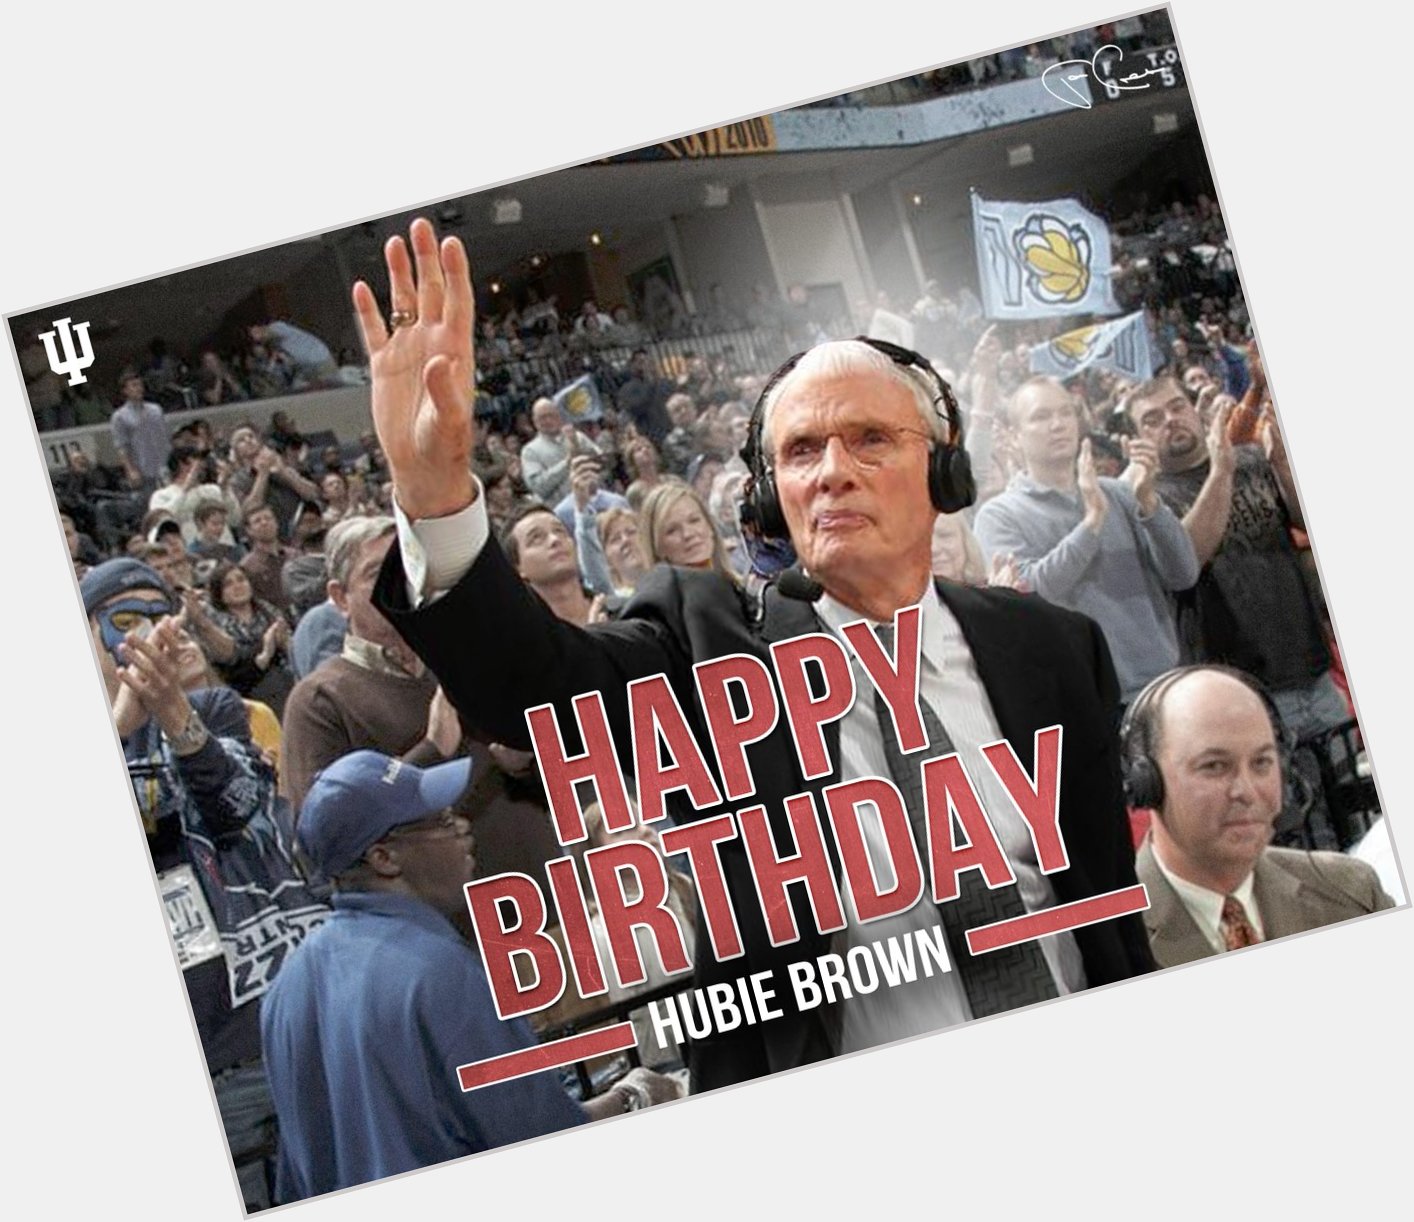 Happy birthday to one of the great minds in basketball, Hubie Brown. 